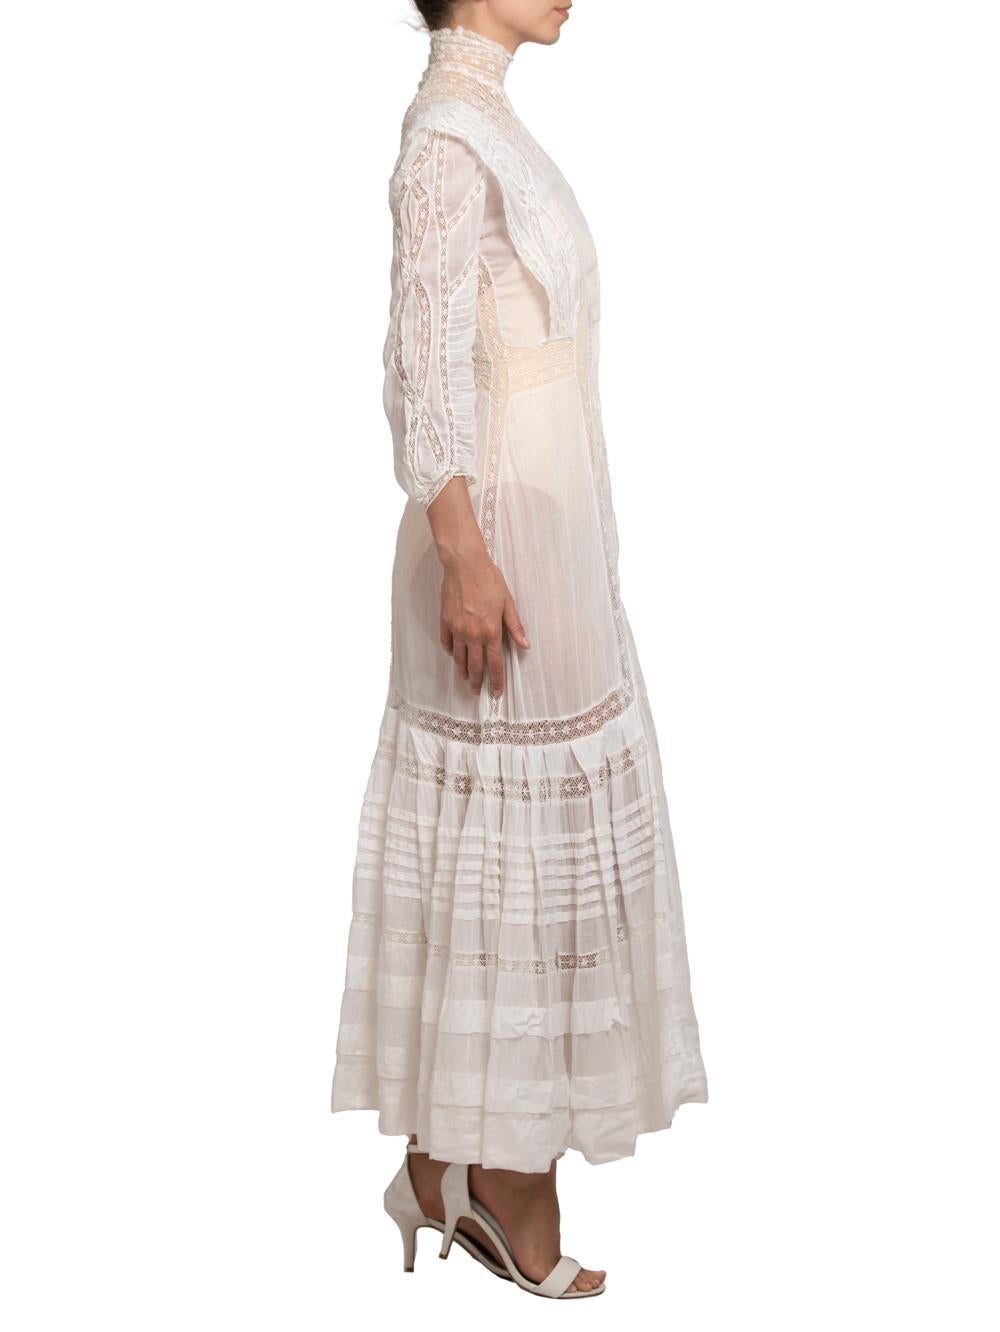 Women's Victorian Cream Organic Cotton Voile & Lace Long Sleeved Dress For Sale